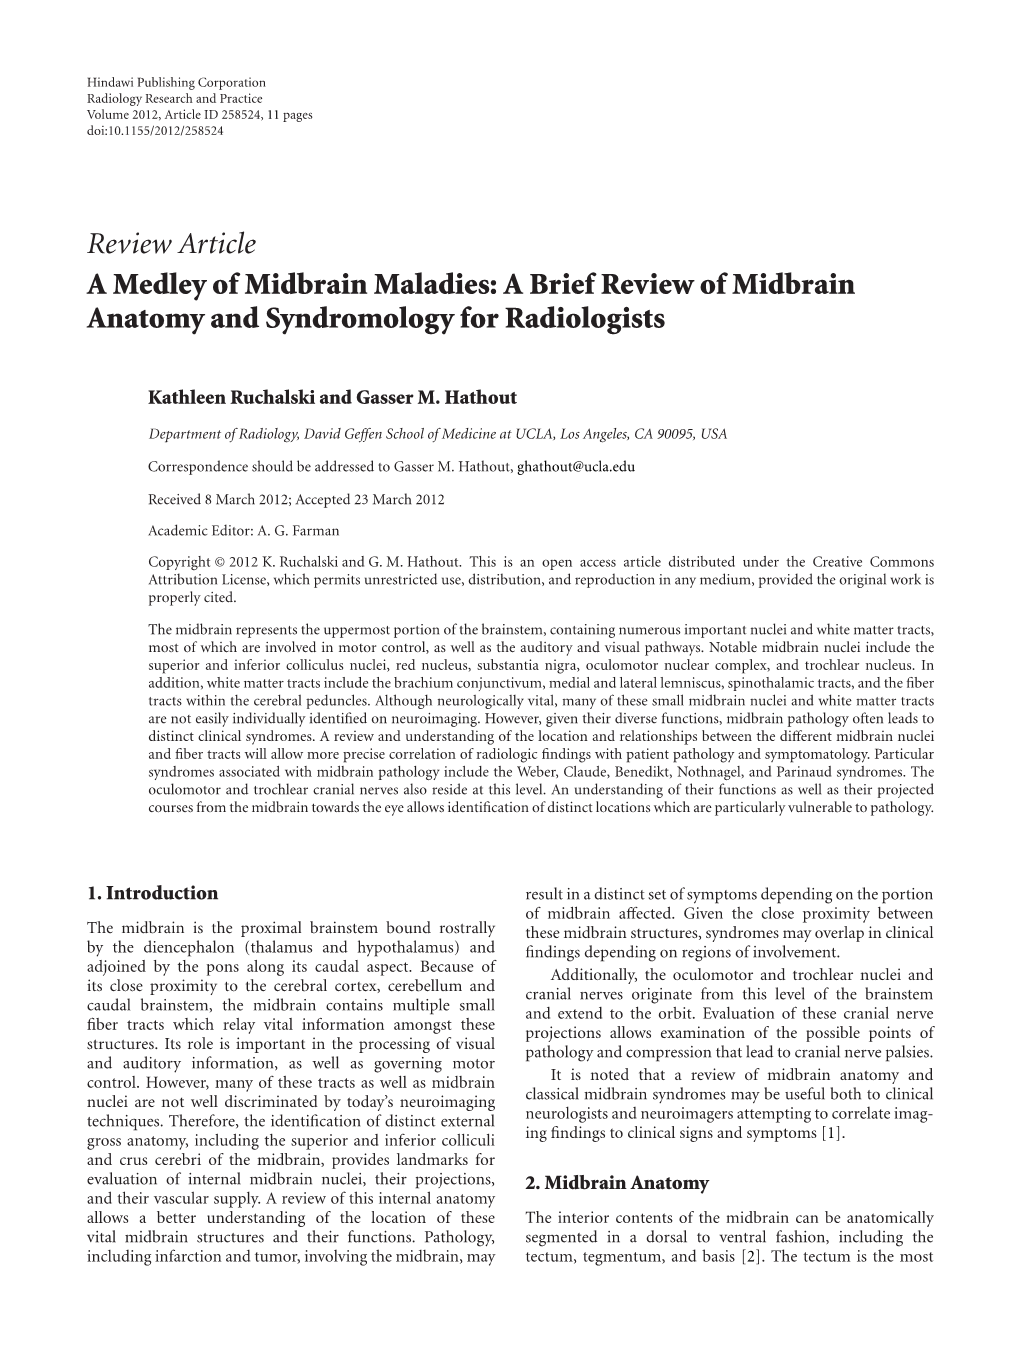 A Medley of Midbrain Maladies: a Brief Review of Midbrain Anatomy and Syndromology for Radiologists